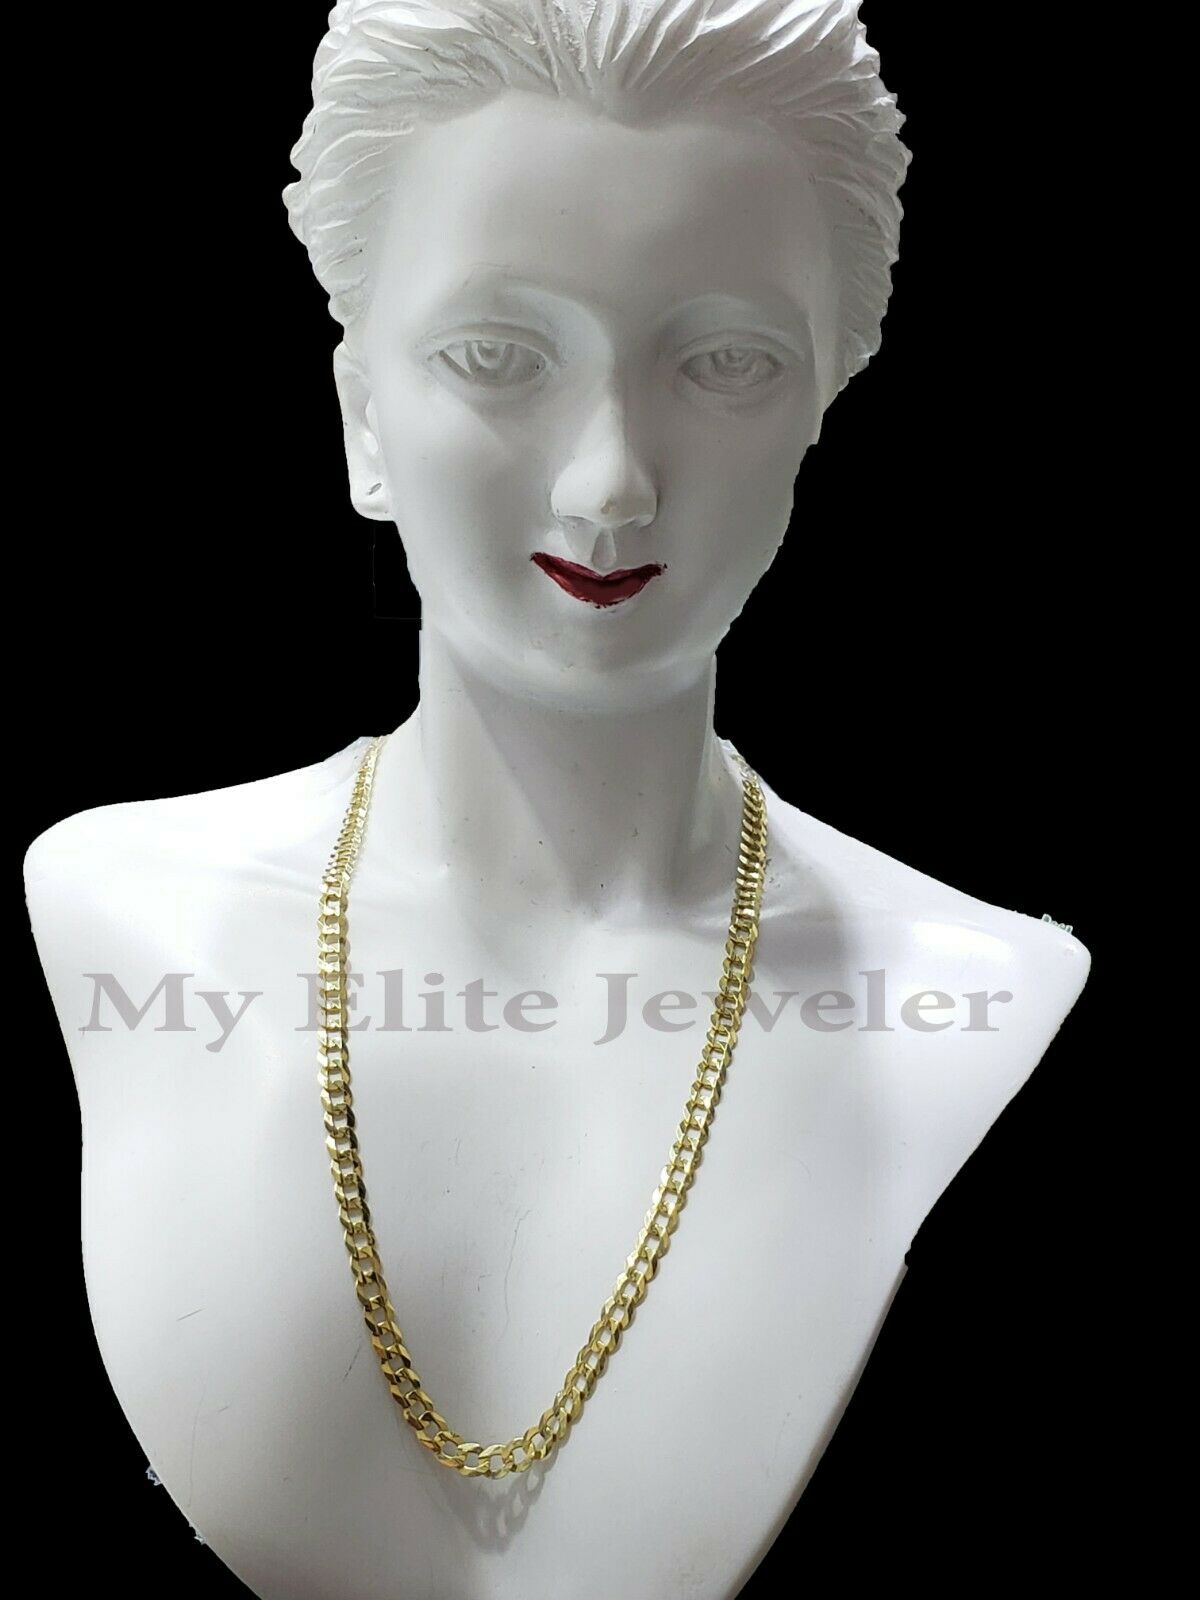 Solid 14k Yellow Gold Ladies Necklace 18 Inch Cuban Curb Link Chain 3.5 MM Women